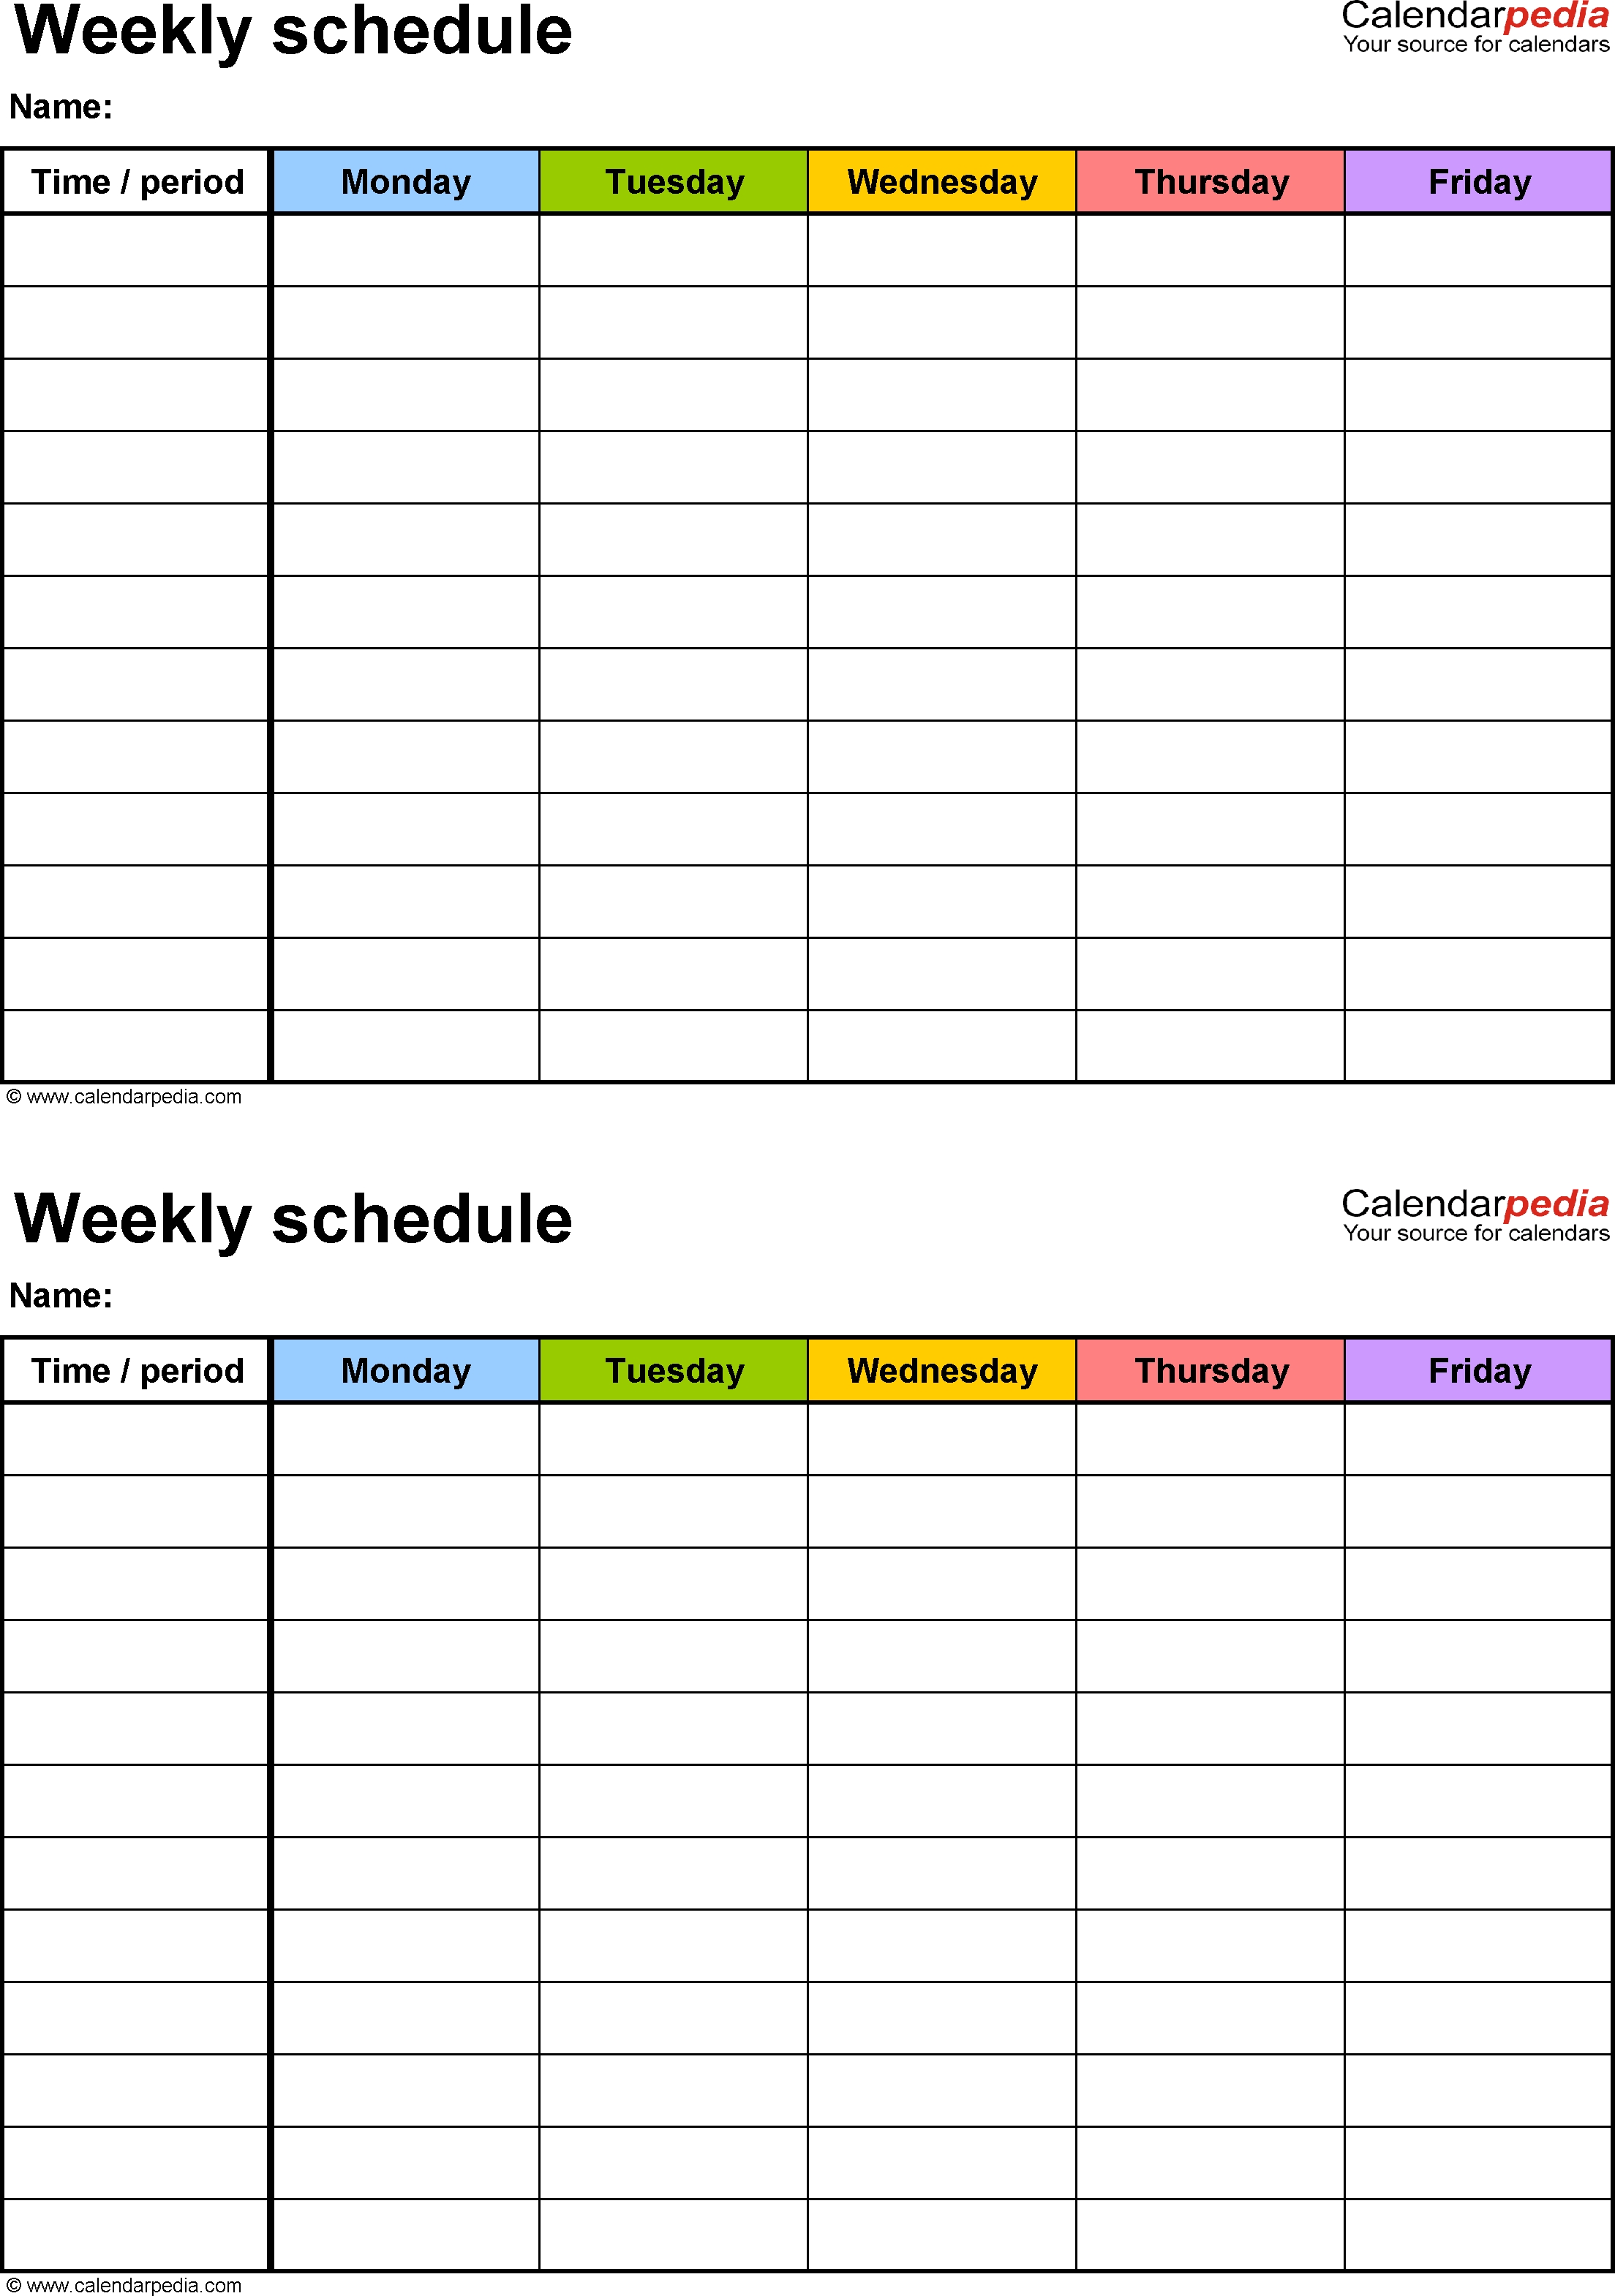 Free Weekly Schedule Templates For Word - 18 Templates-Monday Friday Monthly Calendar Template